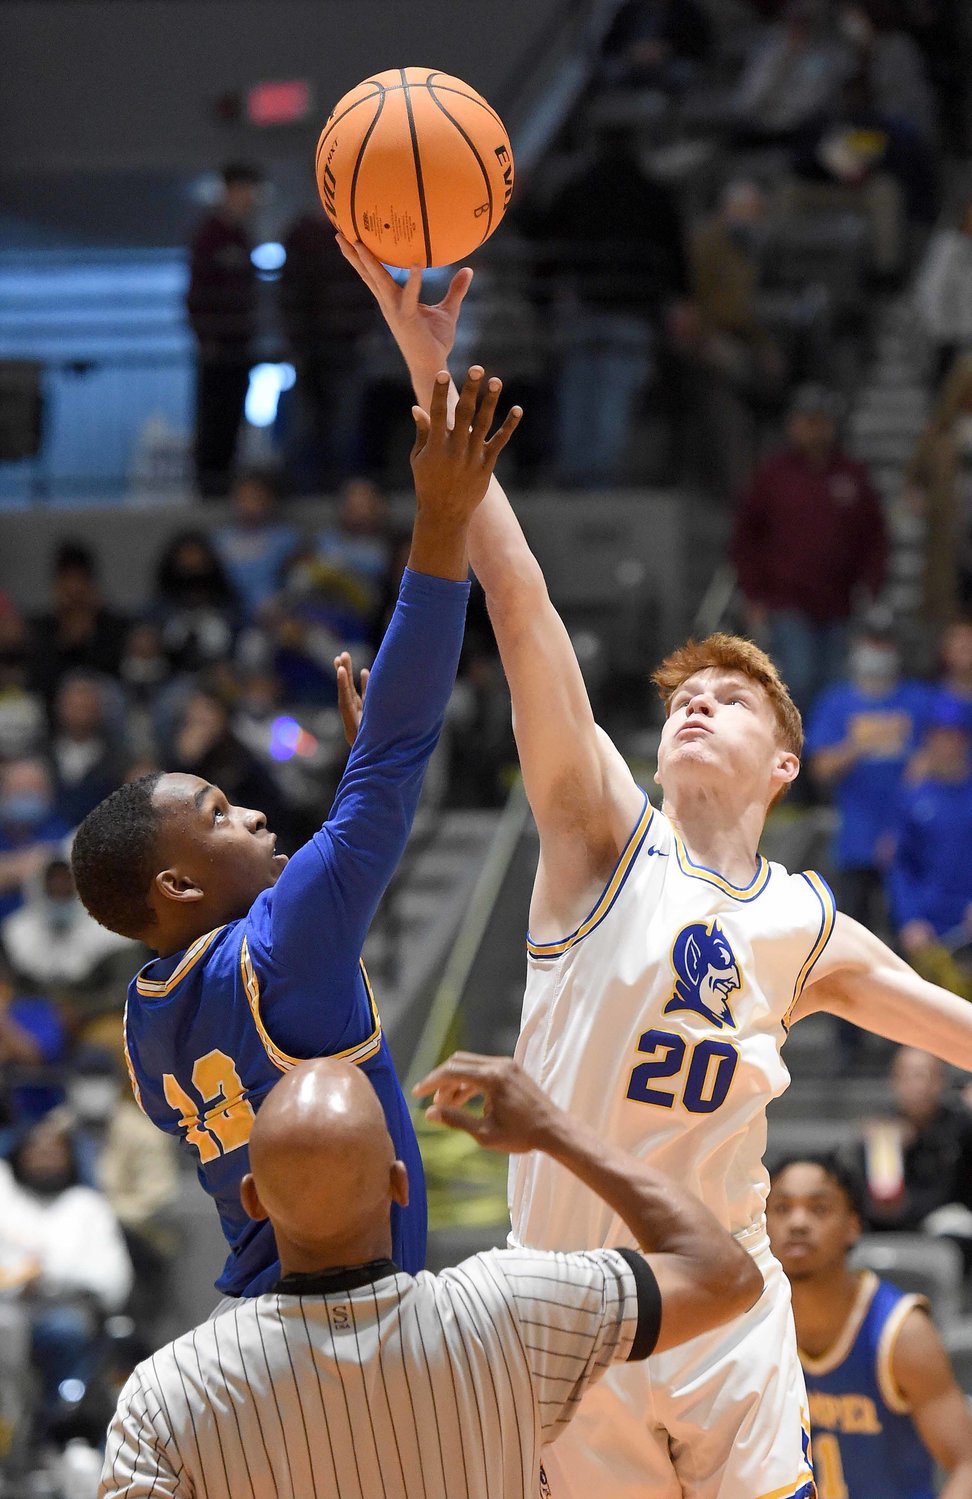 Kemper County's Jamar Grace (12) jumps at ceenter against Booneville's Josh Dukes at the MHSAA State Basketball Tournament  semifinals on Wednesday, March 3, 2021, at the Mississippi Coliseum in Jackson, Miss..